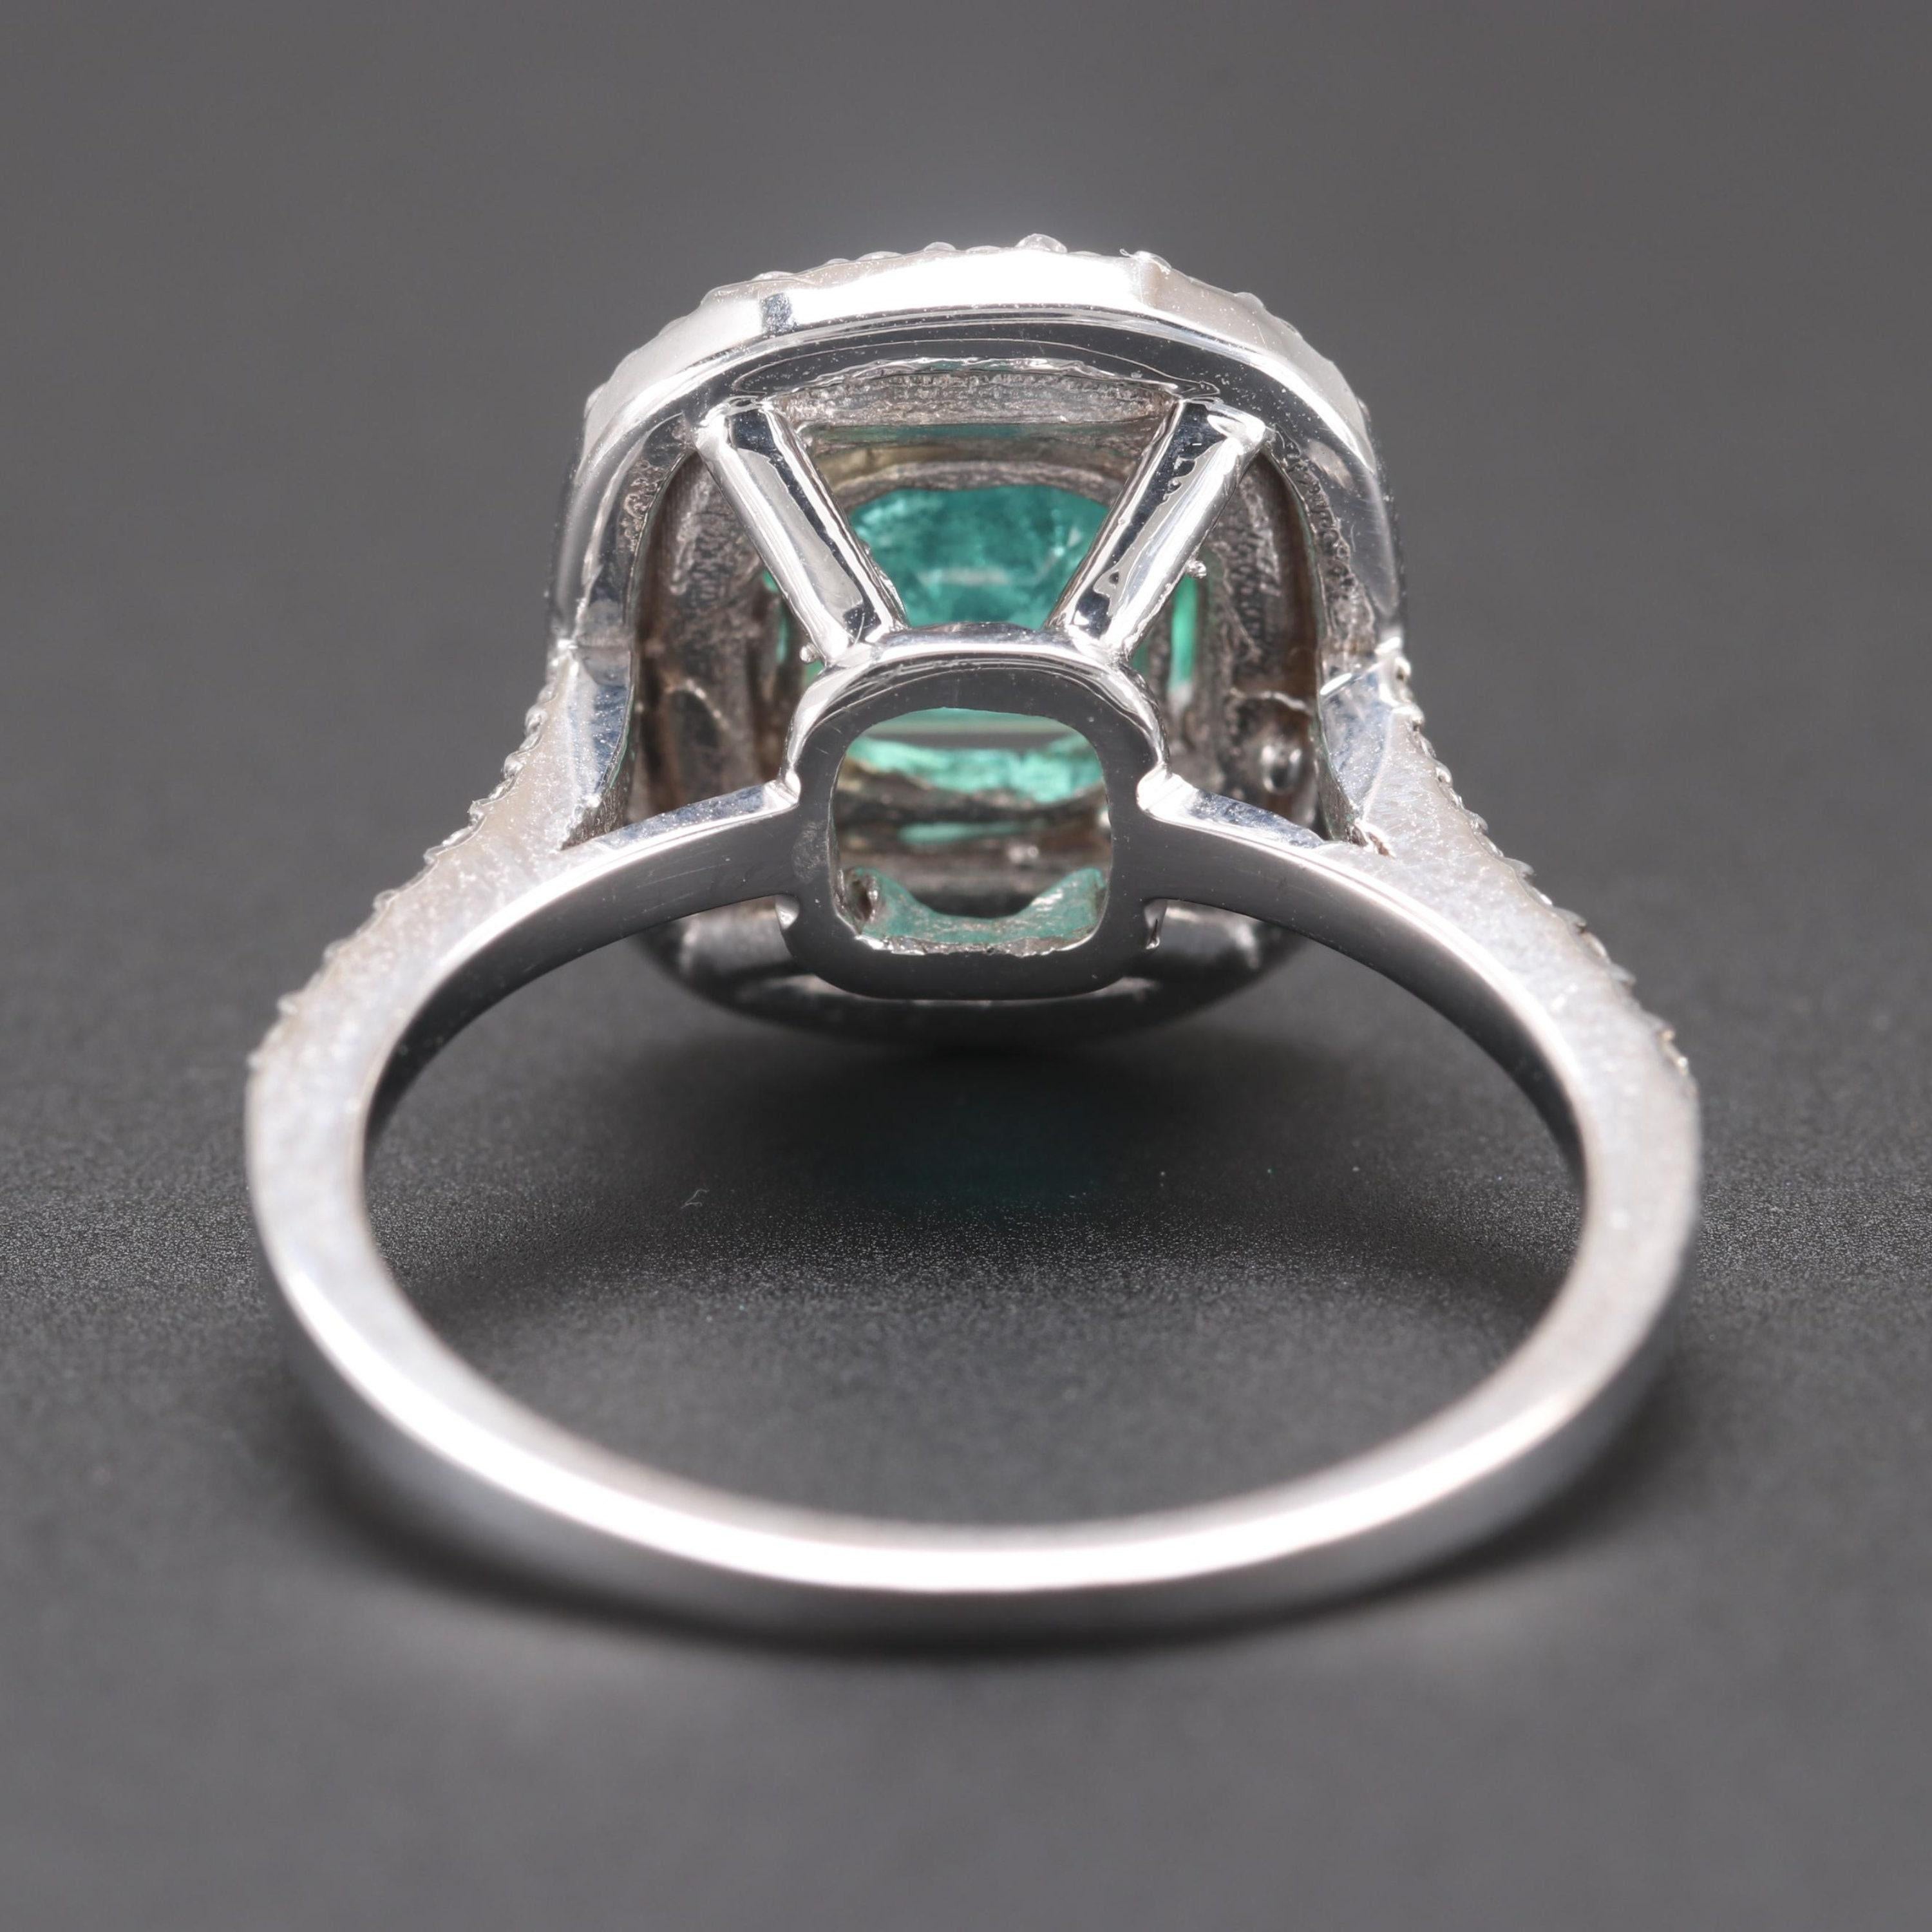 For Sale:  Art Deco Natural Emerald Diamond Engagement Ring Set in 18K Gold, Cocktail Ring 4